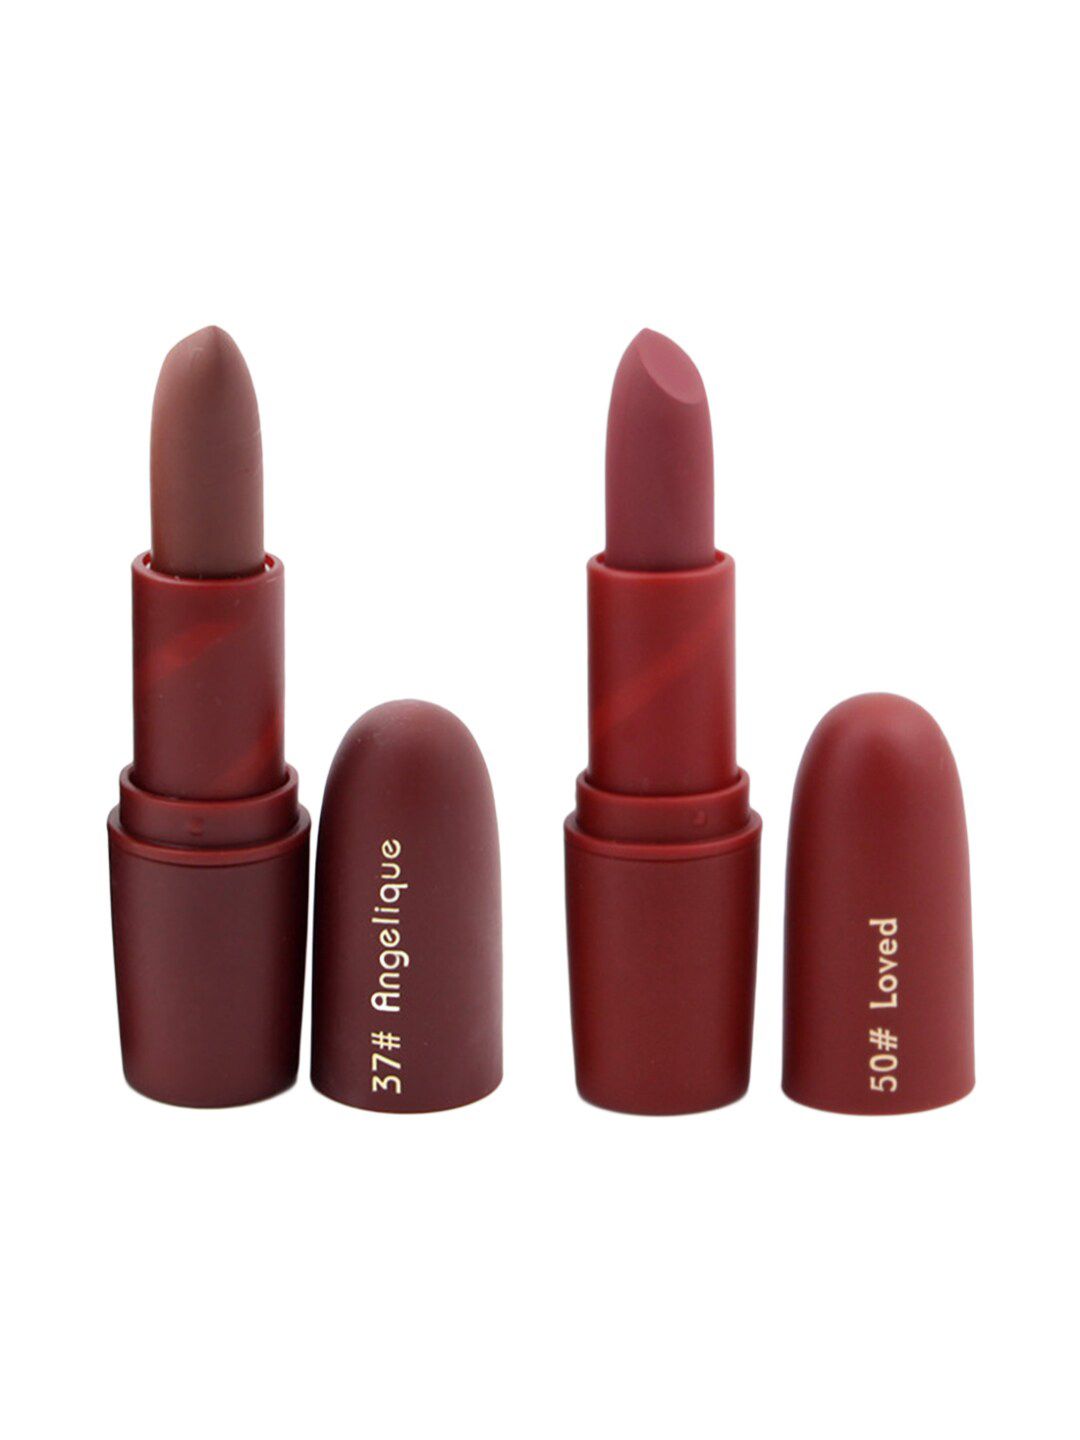 MISS ROSE Professional Make-Up Set of 2 Matte Creamy Lipsticks - Angelique 37 & Loved 50 Price in India